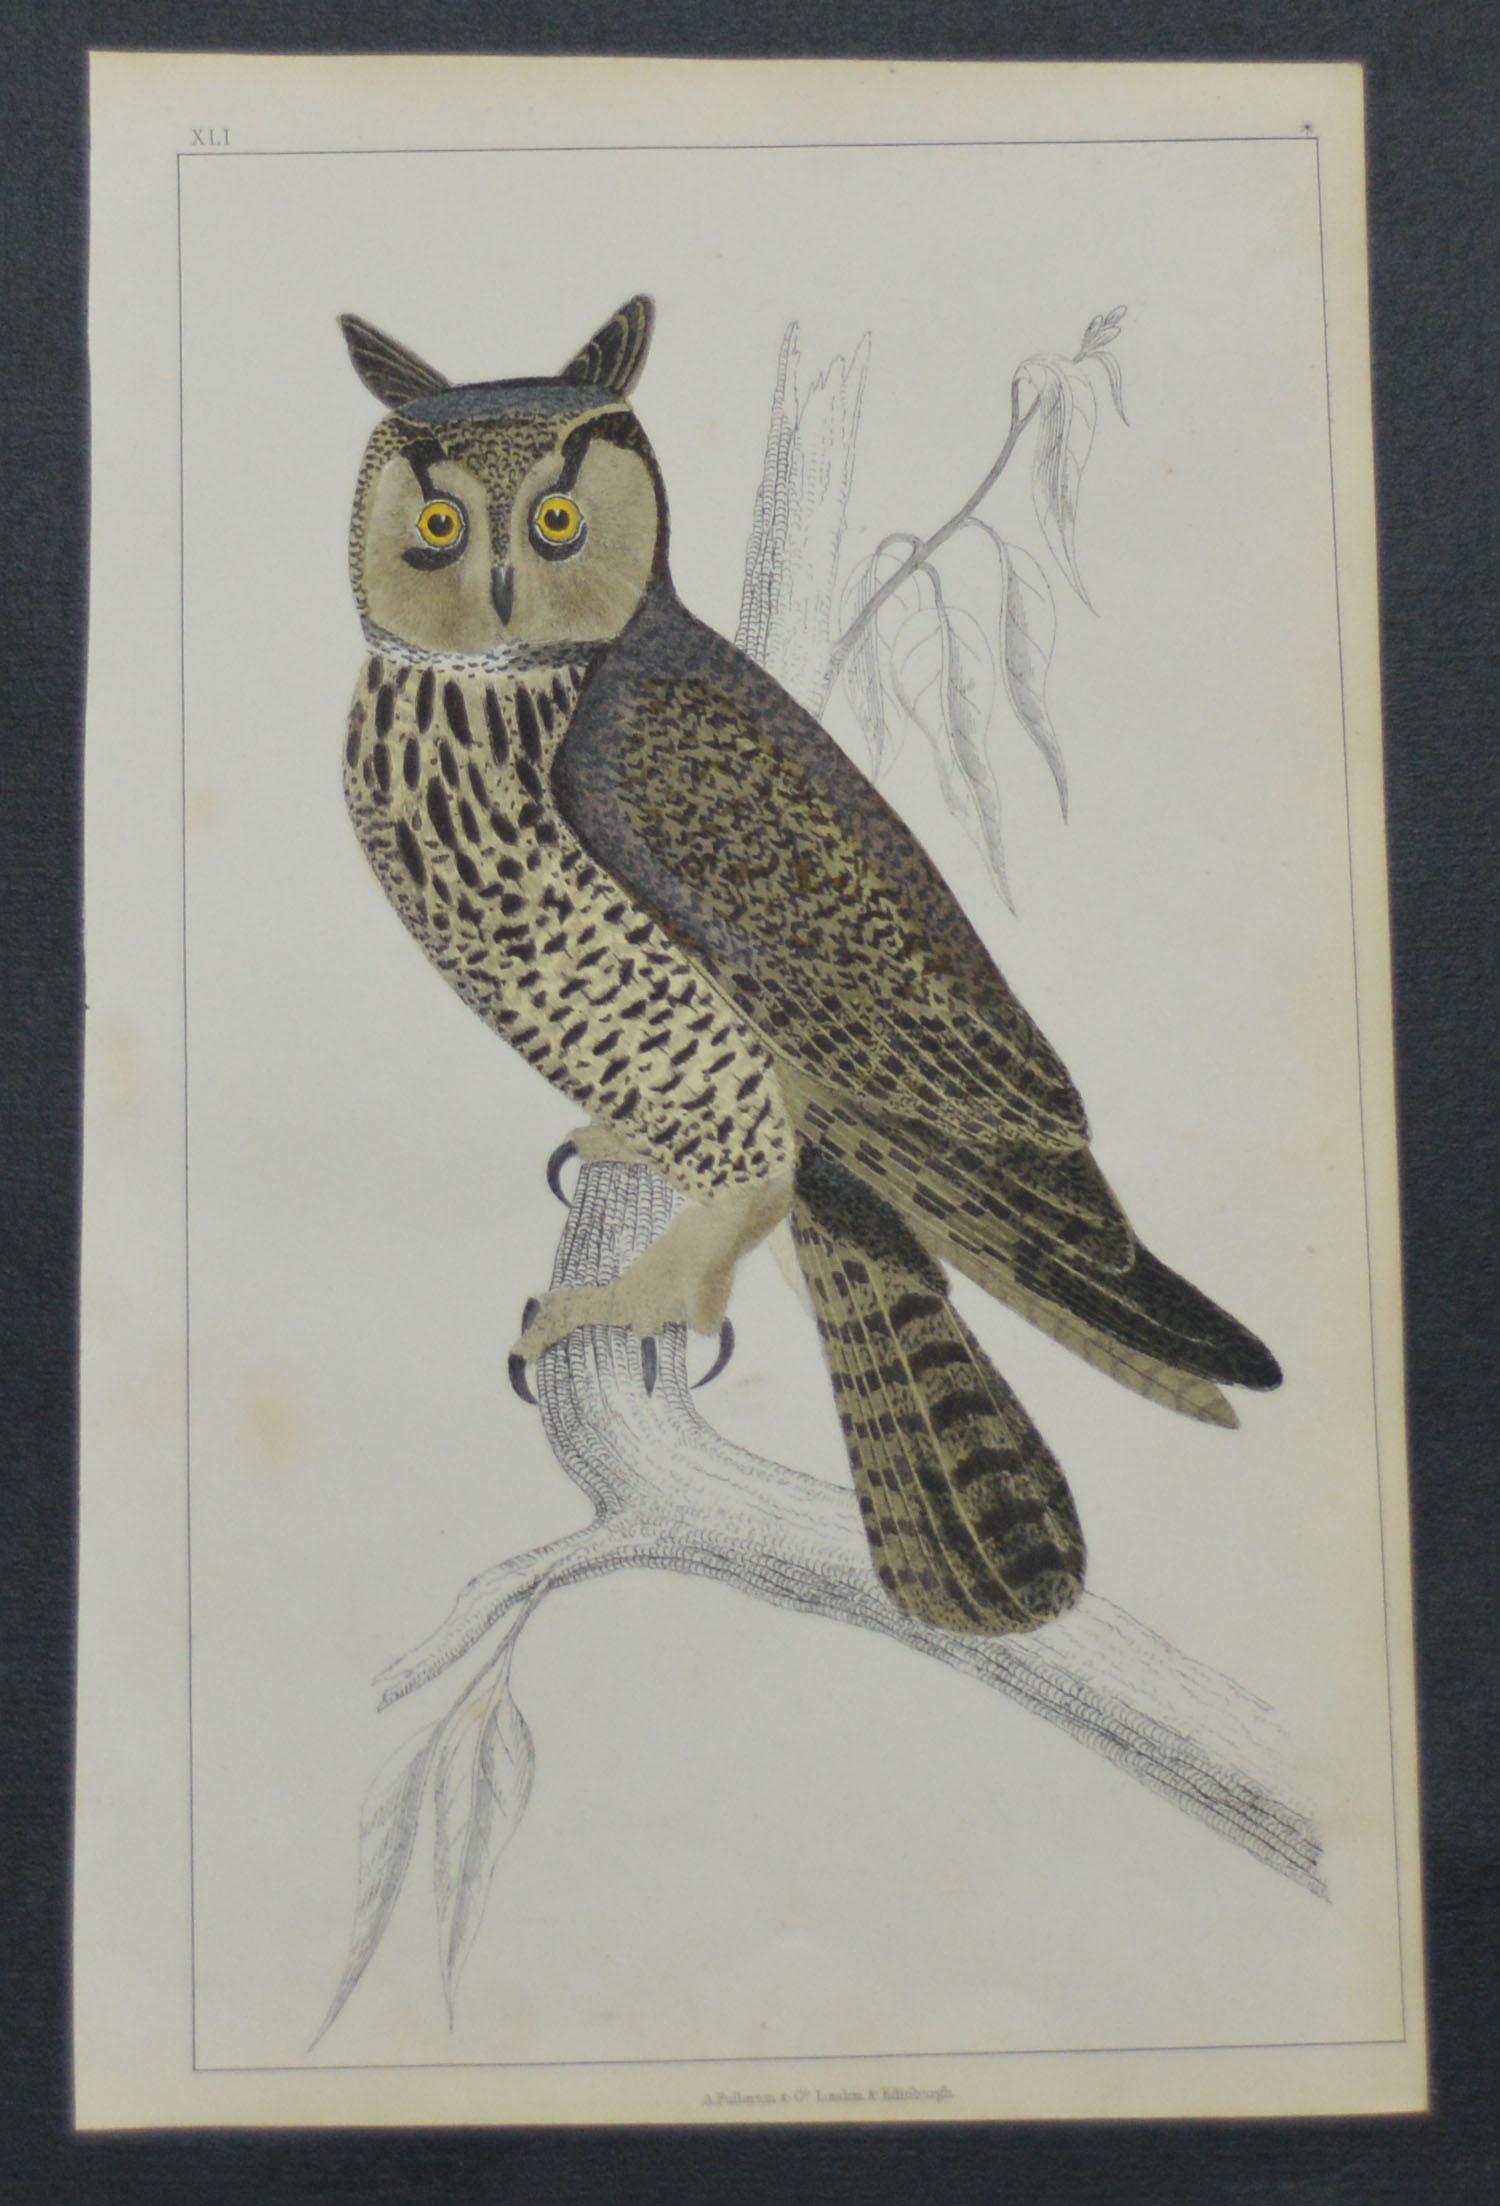 Great image of an owl.

I have listed several loose natural history prints in the same series.

Unframed. It gives you the option of perhaps making a set up using your own choice of frames.

Lithograph after Cpt. Brown with original hand